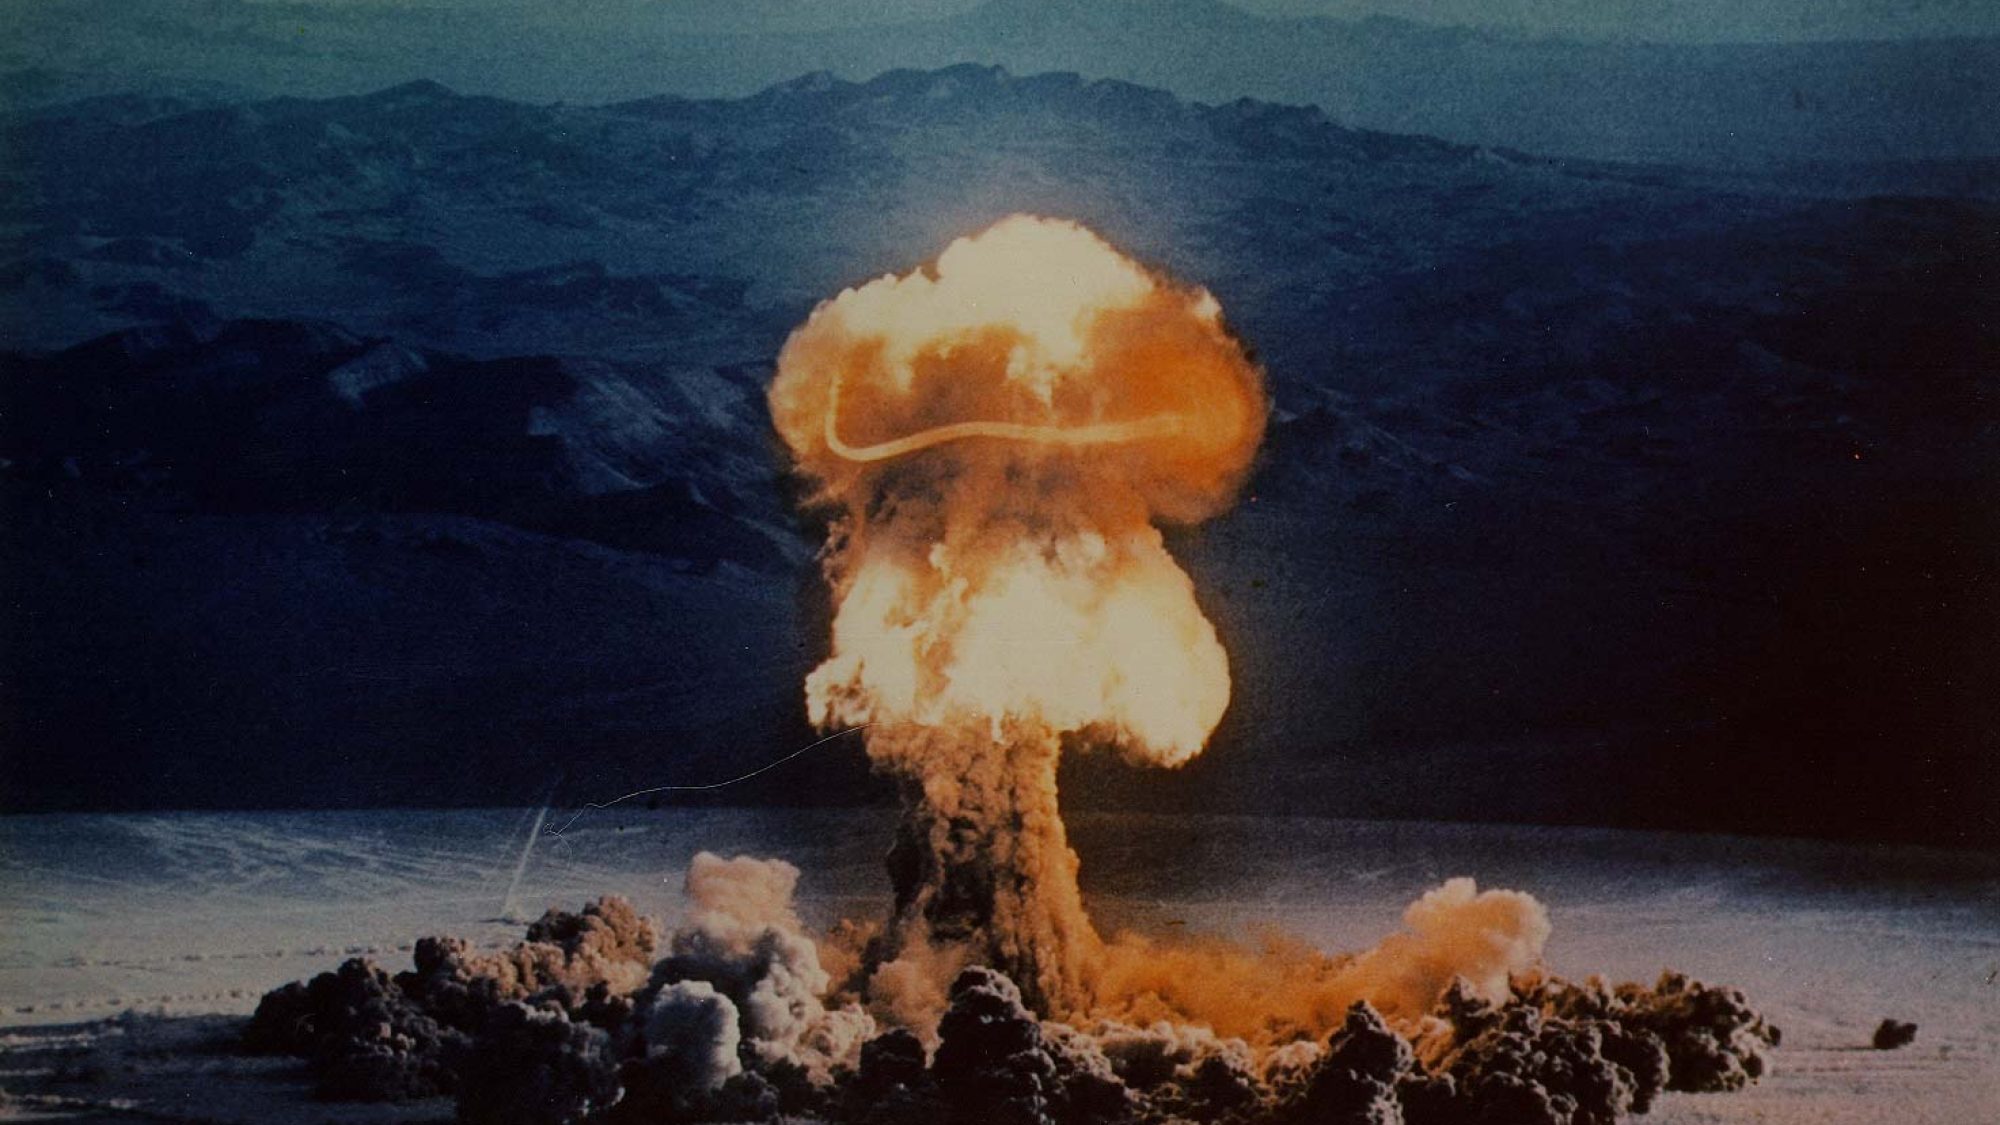 nuclear weapons test in Nevada